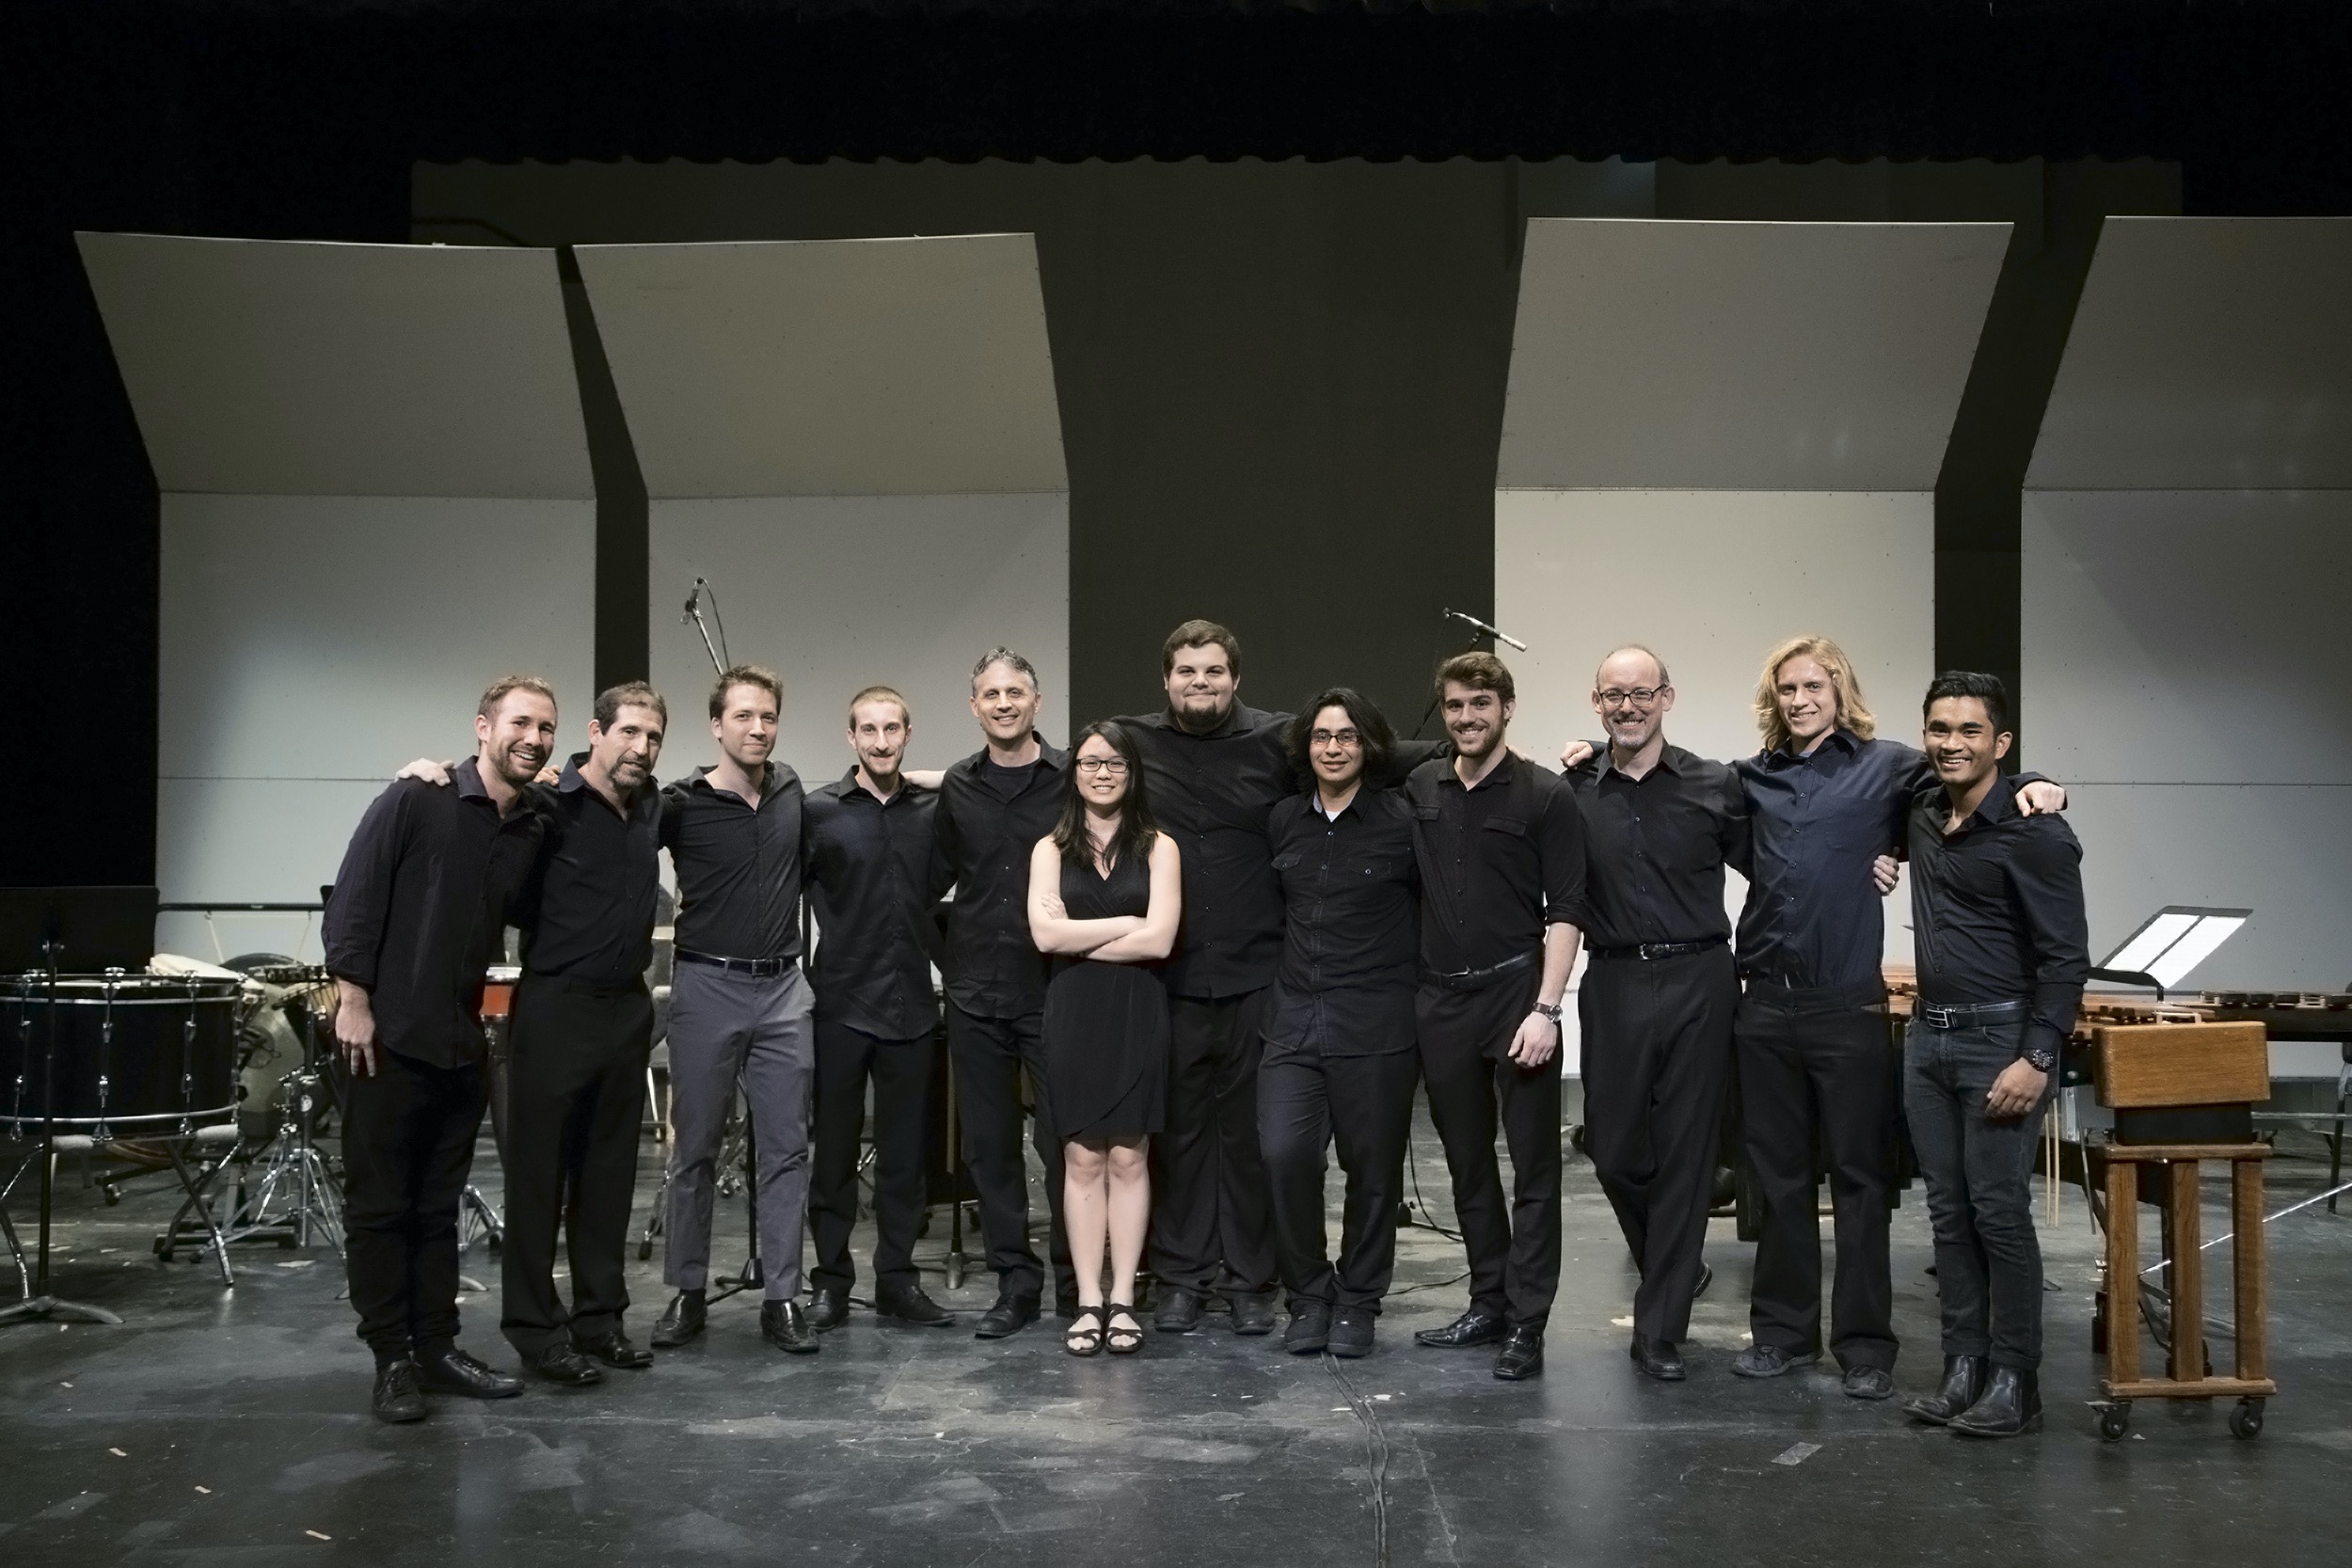 UCSB Percussion Ensemble with special guests Wade Culbreath, James Beauton, and Ken McGrath after their Winter 2016 concert. Jon Nathan, Director